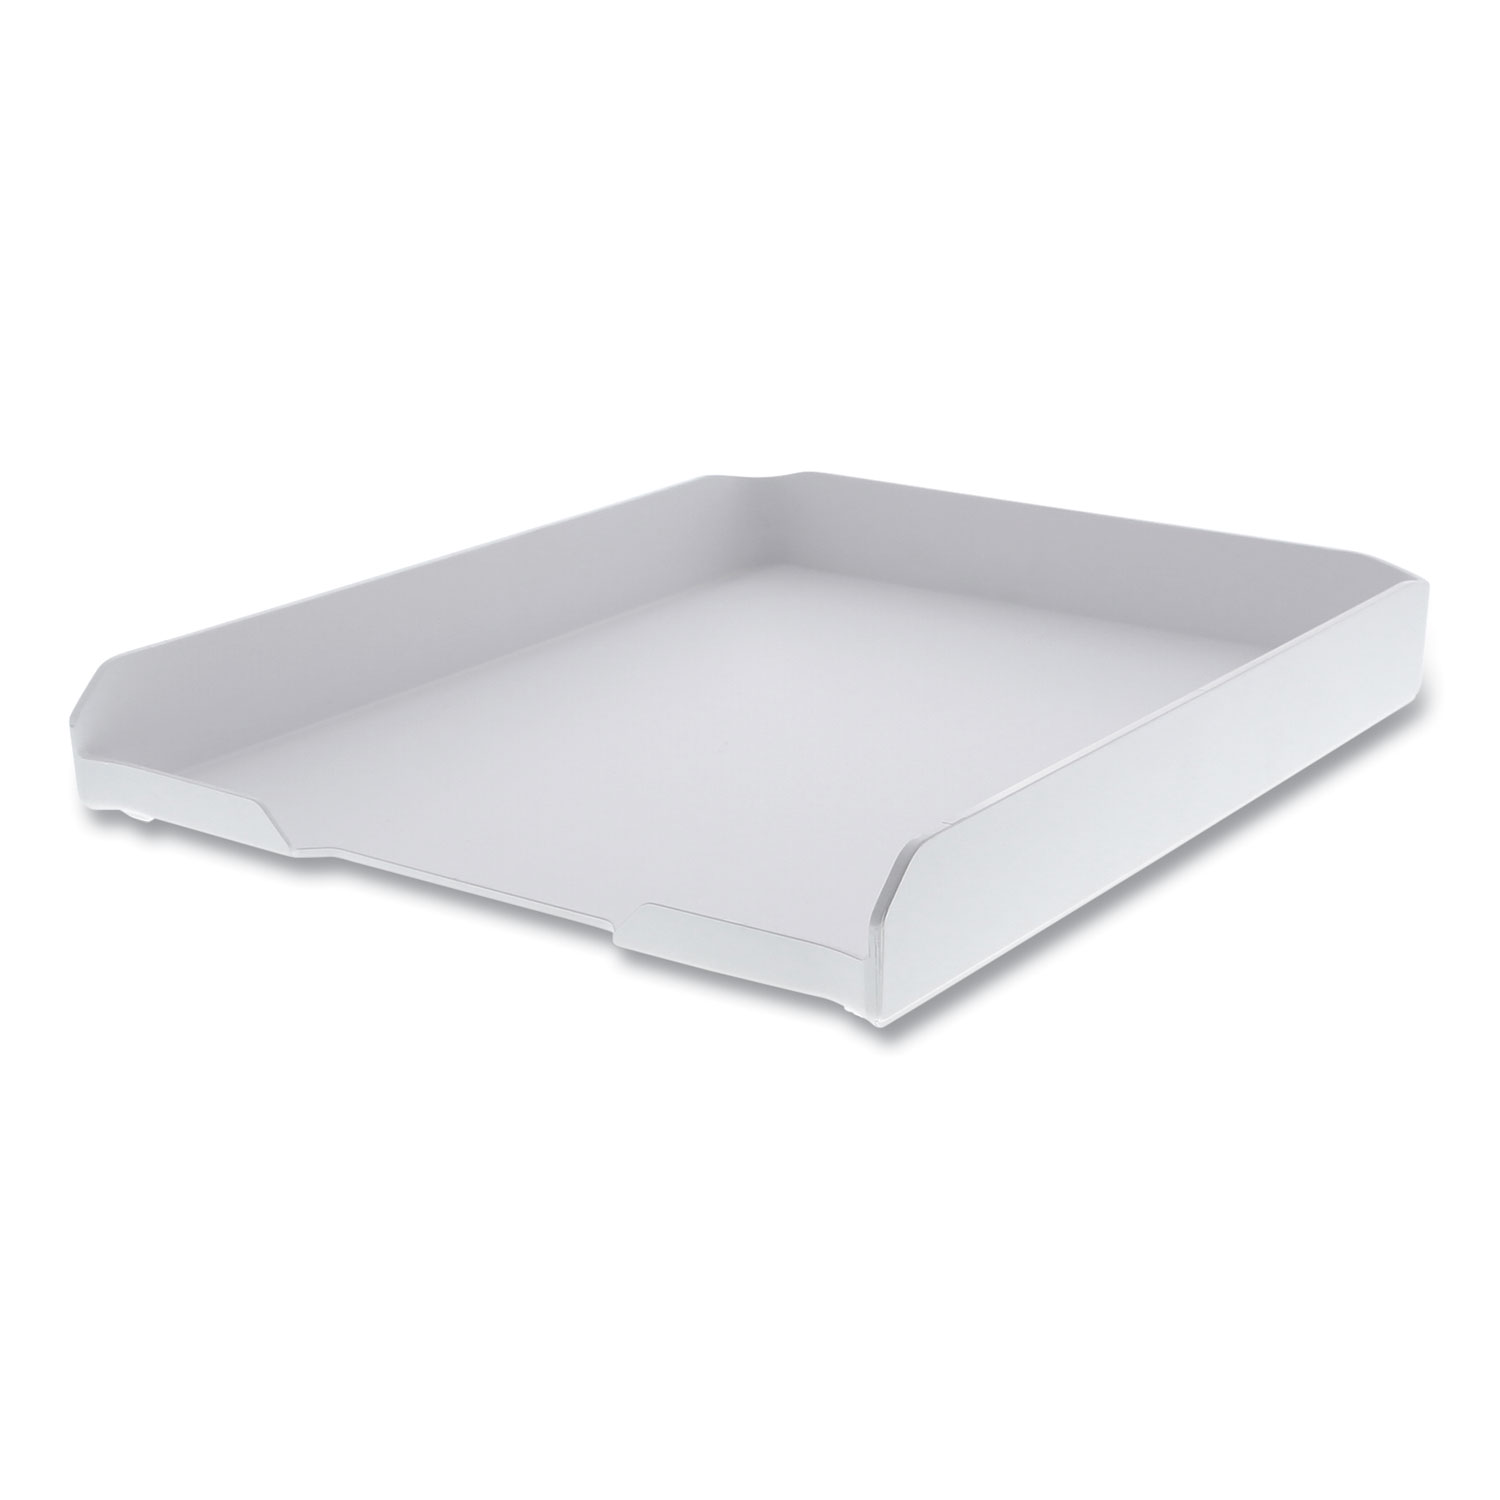  Bostitch KT-TRAY-WHITE Konnect Stackable Letter Tray, 1 Section, Letter Size Files, 10.13 x 12.25 x 1.63, White (BOS24357594) 